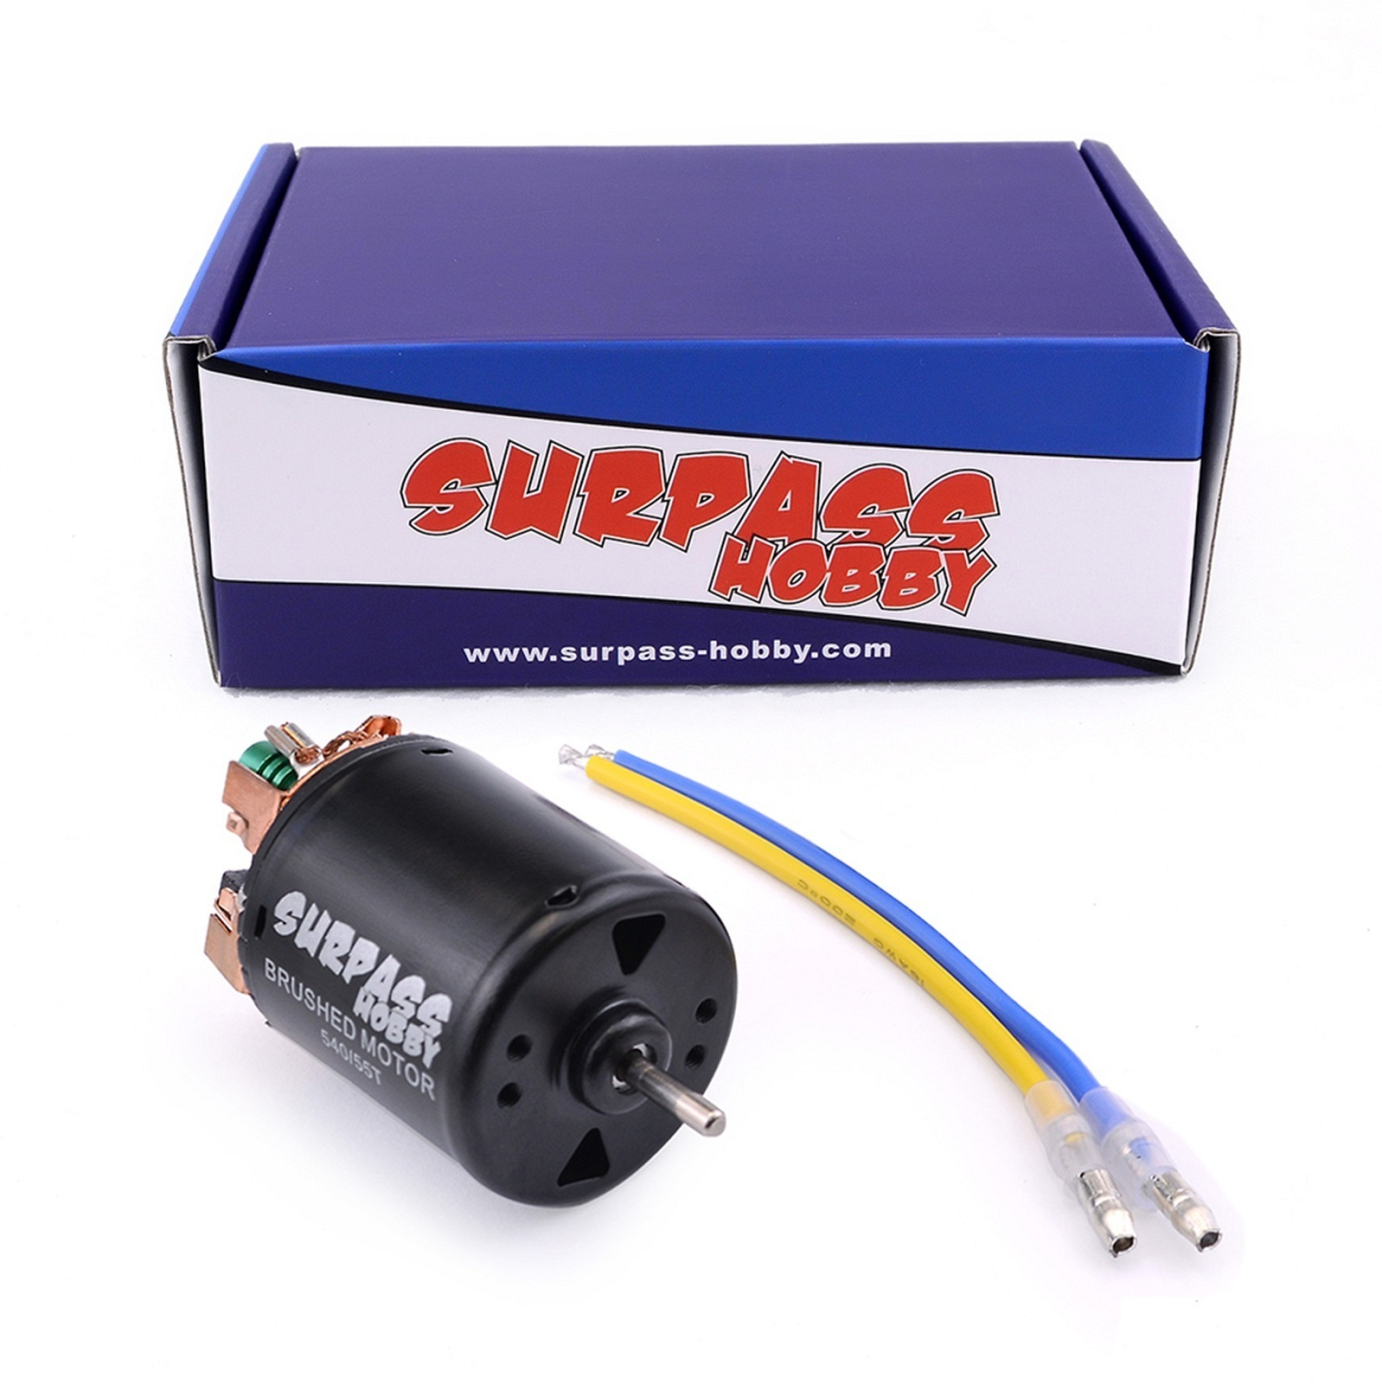 Surpass Hobby 540 brushed motor 3-slot 35T RPM: 13000 IO: 1.1A ?